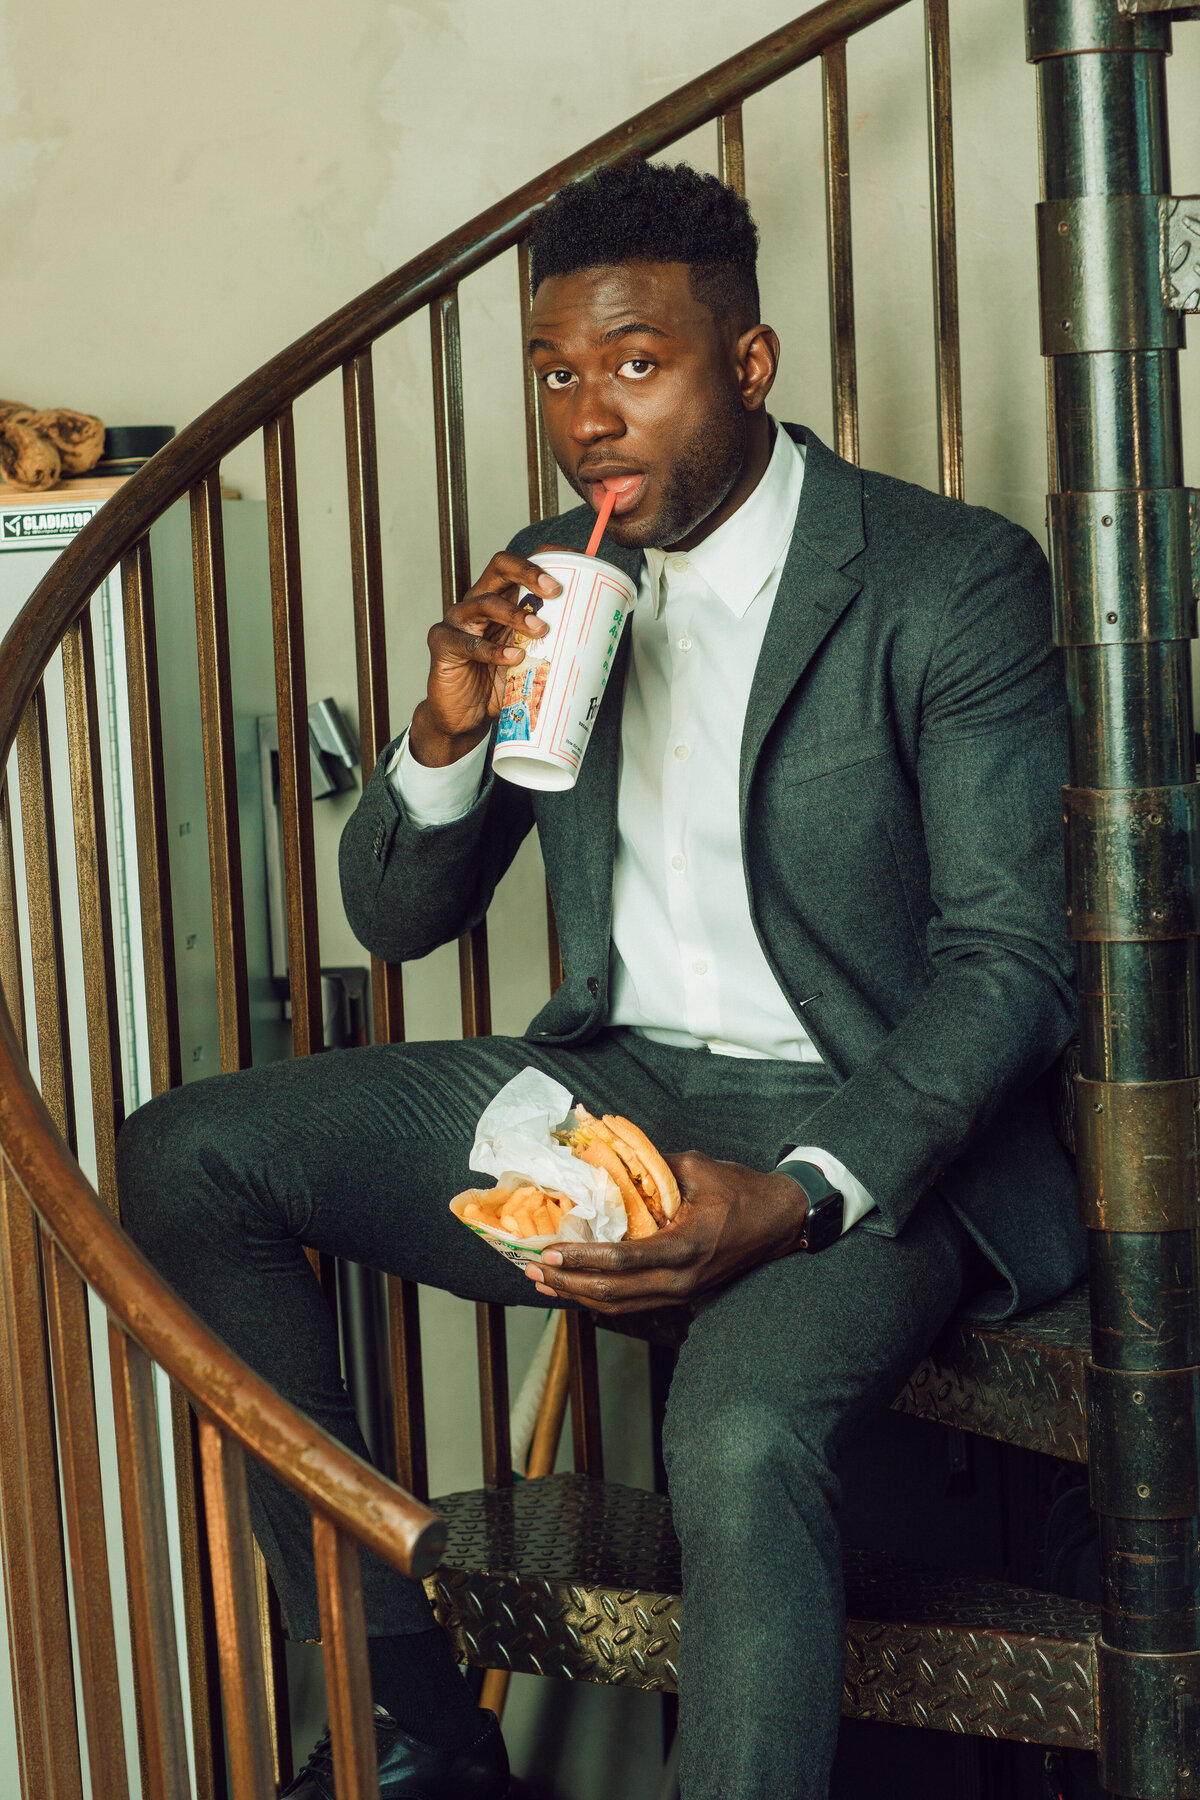 Portrait Photo Of Young Black Man In Suit Holding a Hamburger While Sipping a Drink Los Angeles